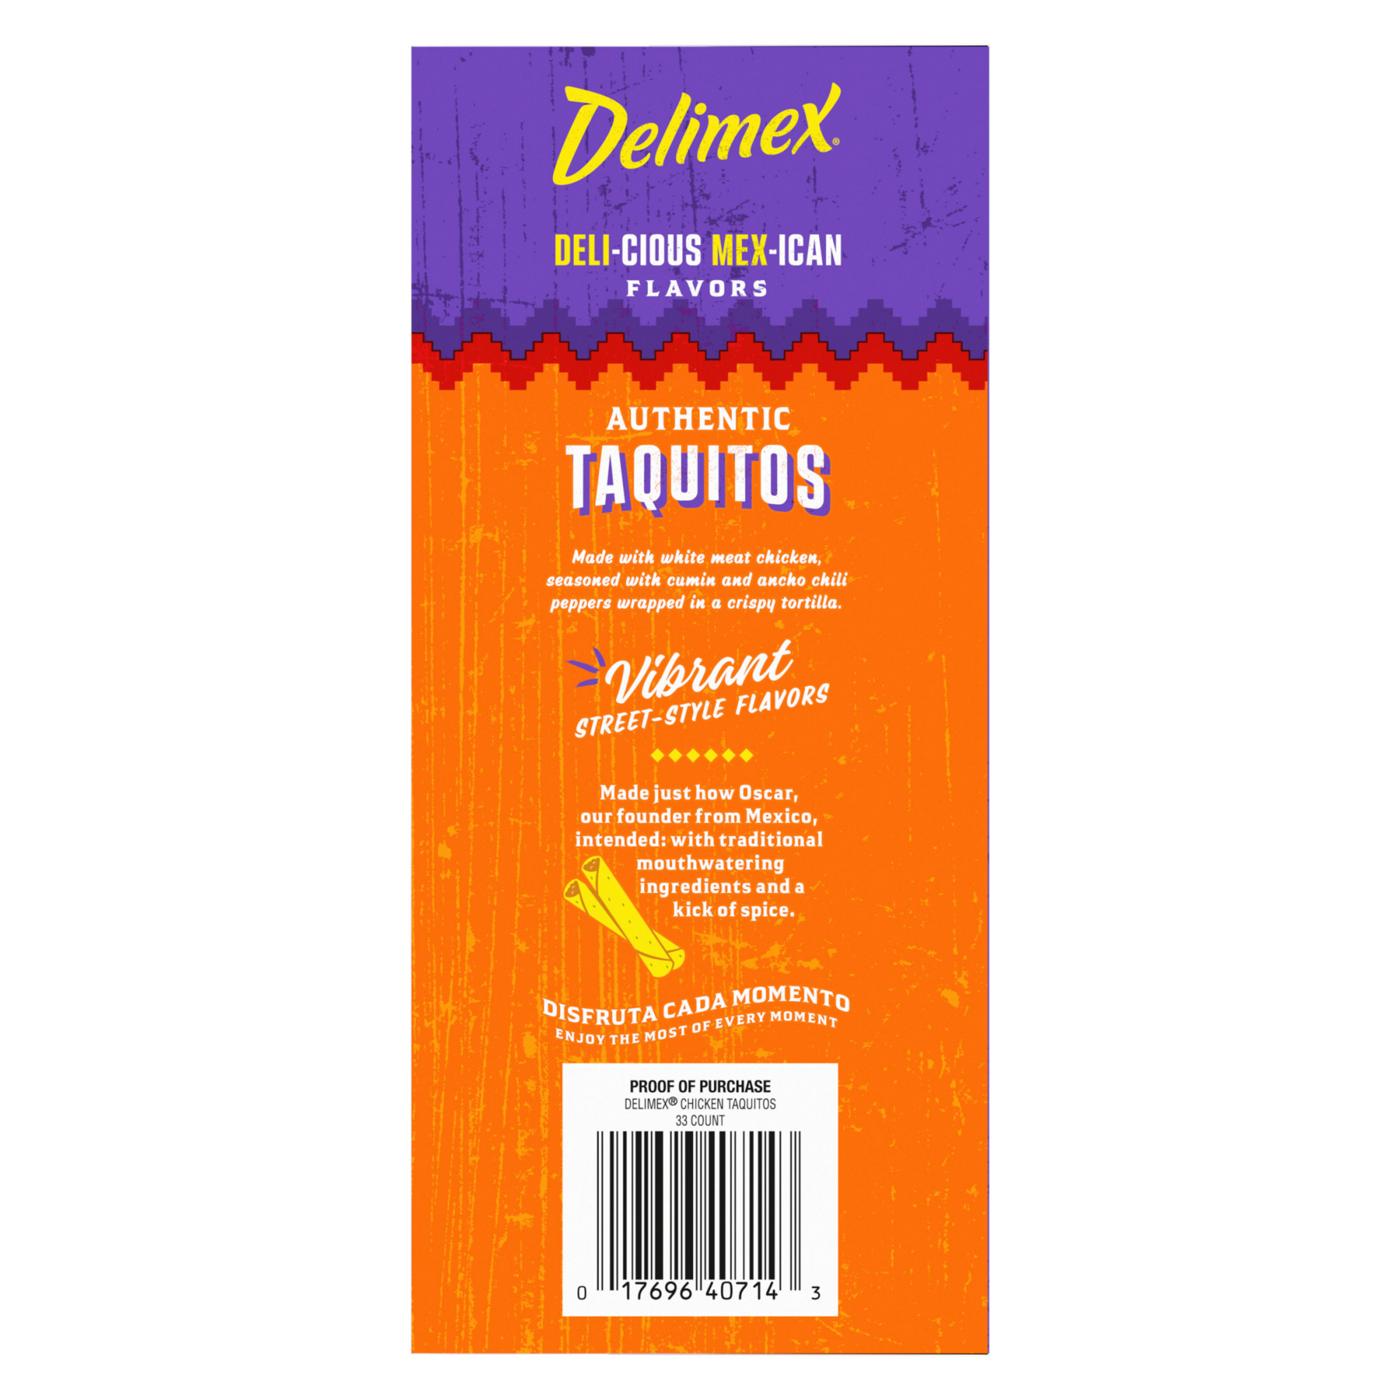 Delimex White Meat Chicken Corn Taquitos; image 6 of 6